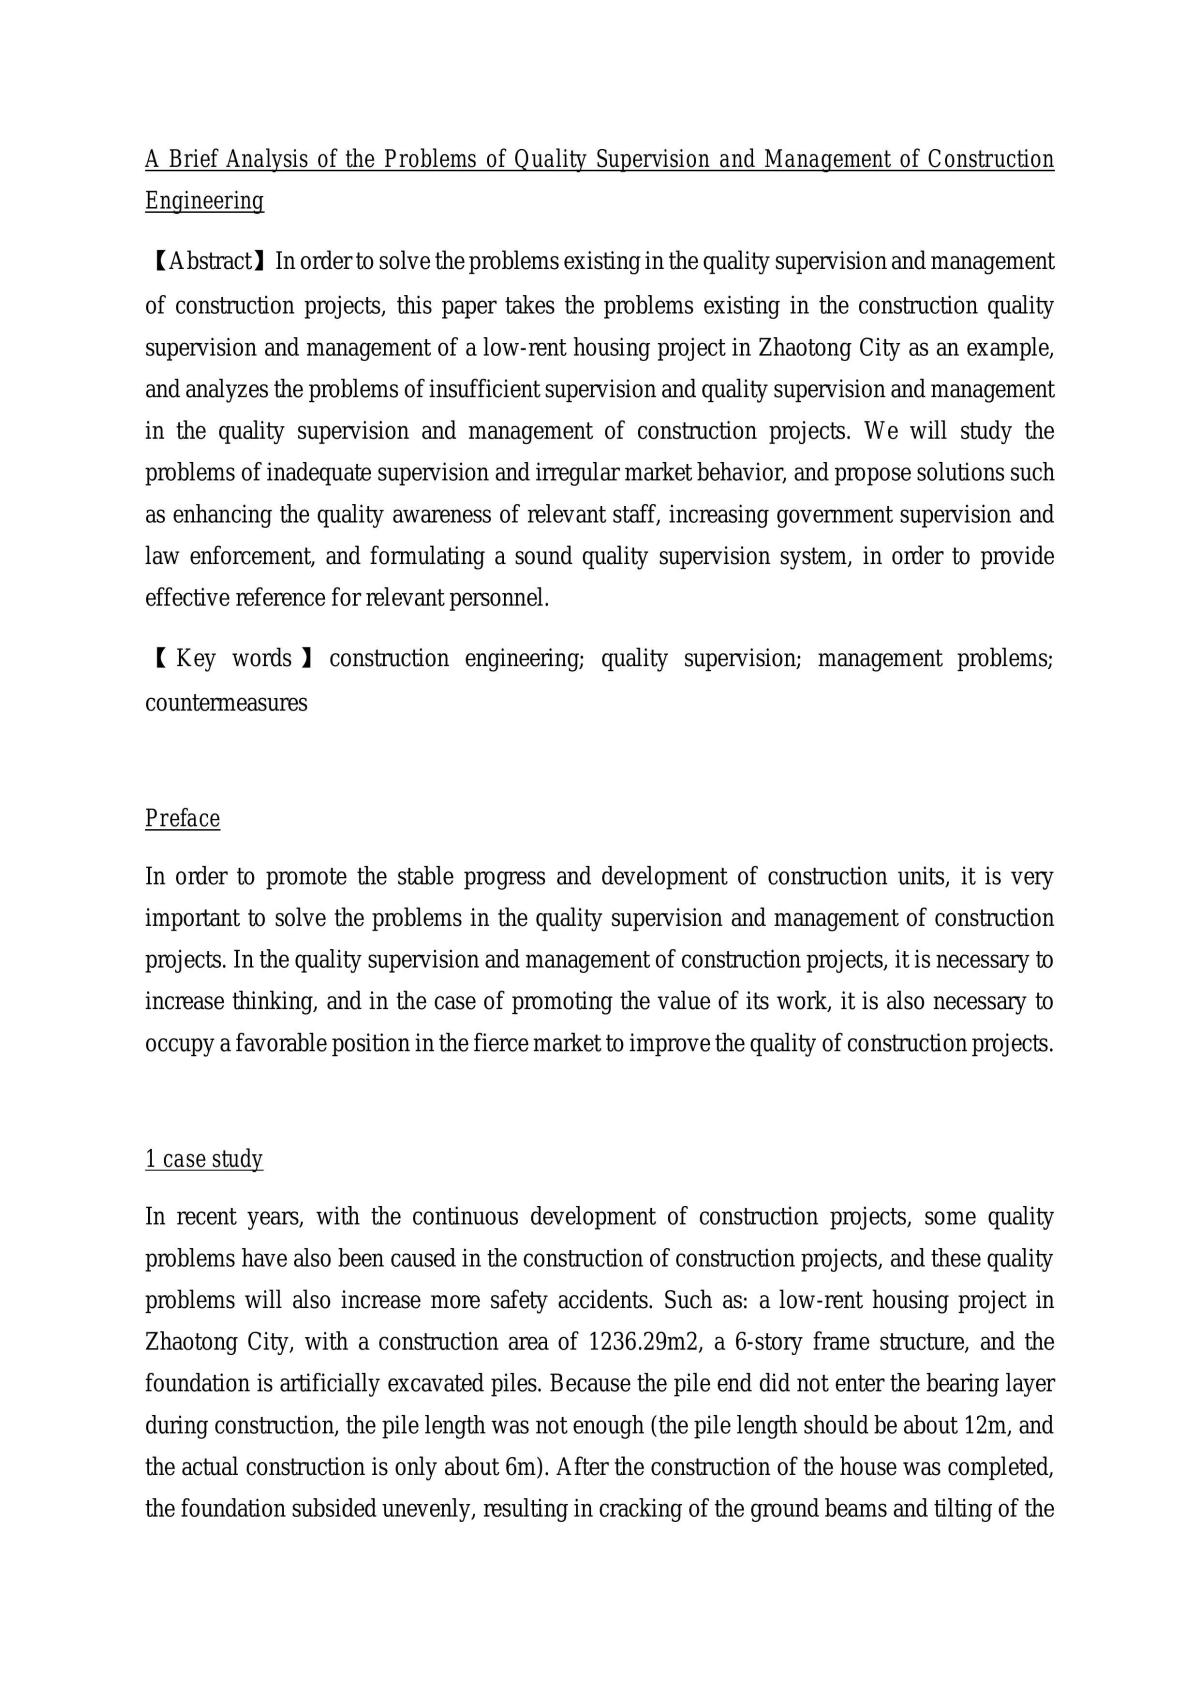 Brief Analysis of the Problems of Quality Supervision and Management of Construction Engineering - Page 1